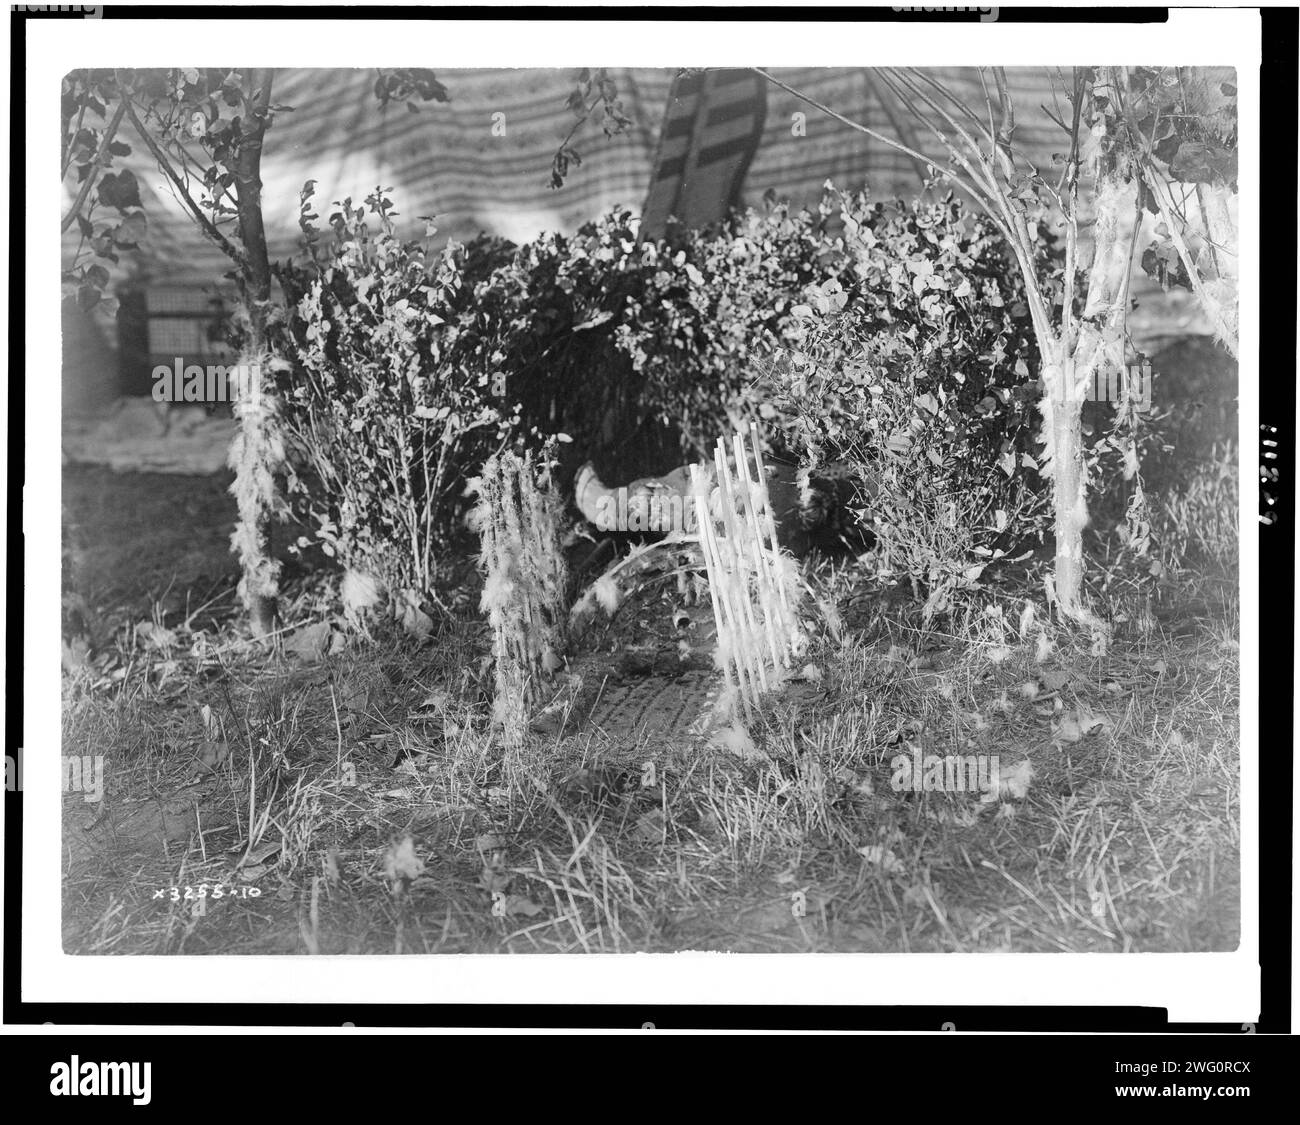 The altar, c1910. Cheyenne altar inside tent, with buffalo skull on ground surrounded by boughs and sticks with feathers; additional sticks and feathers are lined up on both sides of pattern drawn on ground. Stock Photo